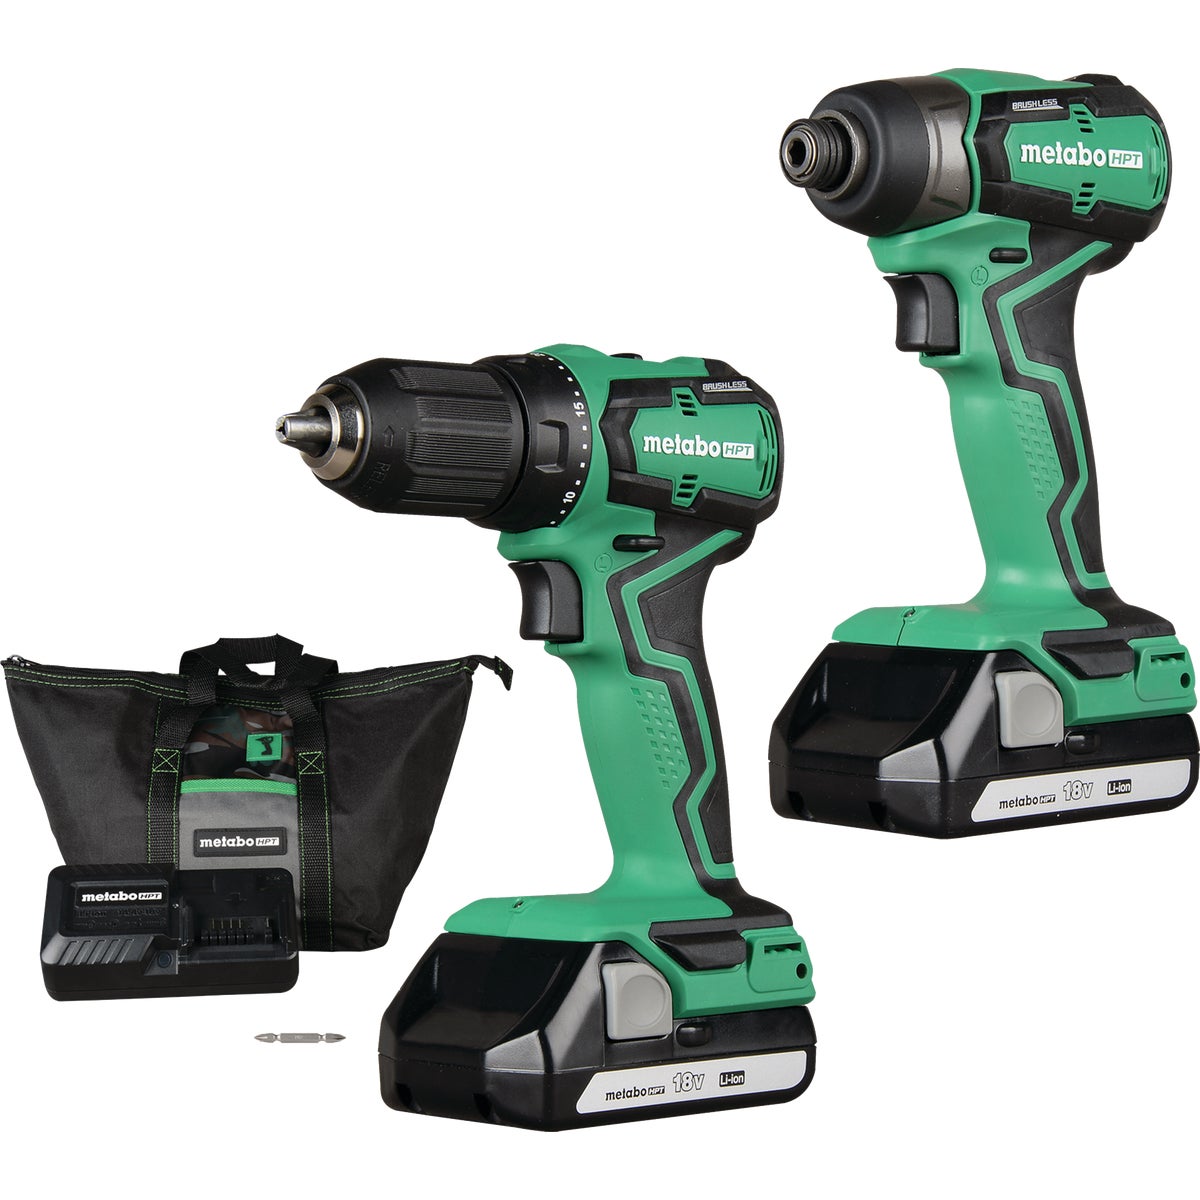 Metabo 18V 2-Tool Lithium-Ion Sub-Compact Drill/Driver & Impact Driver Cordless Tool Combo Kit